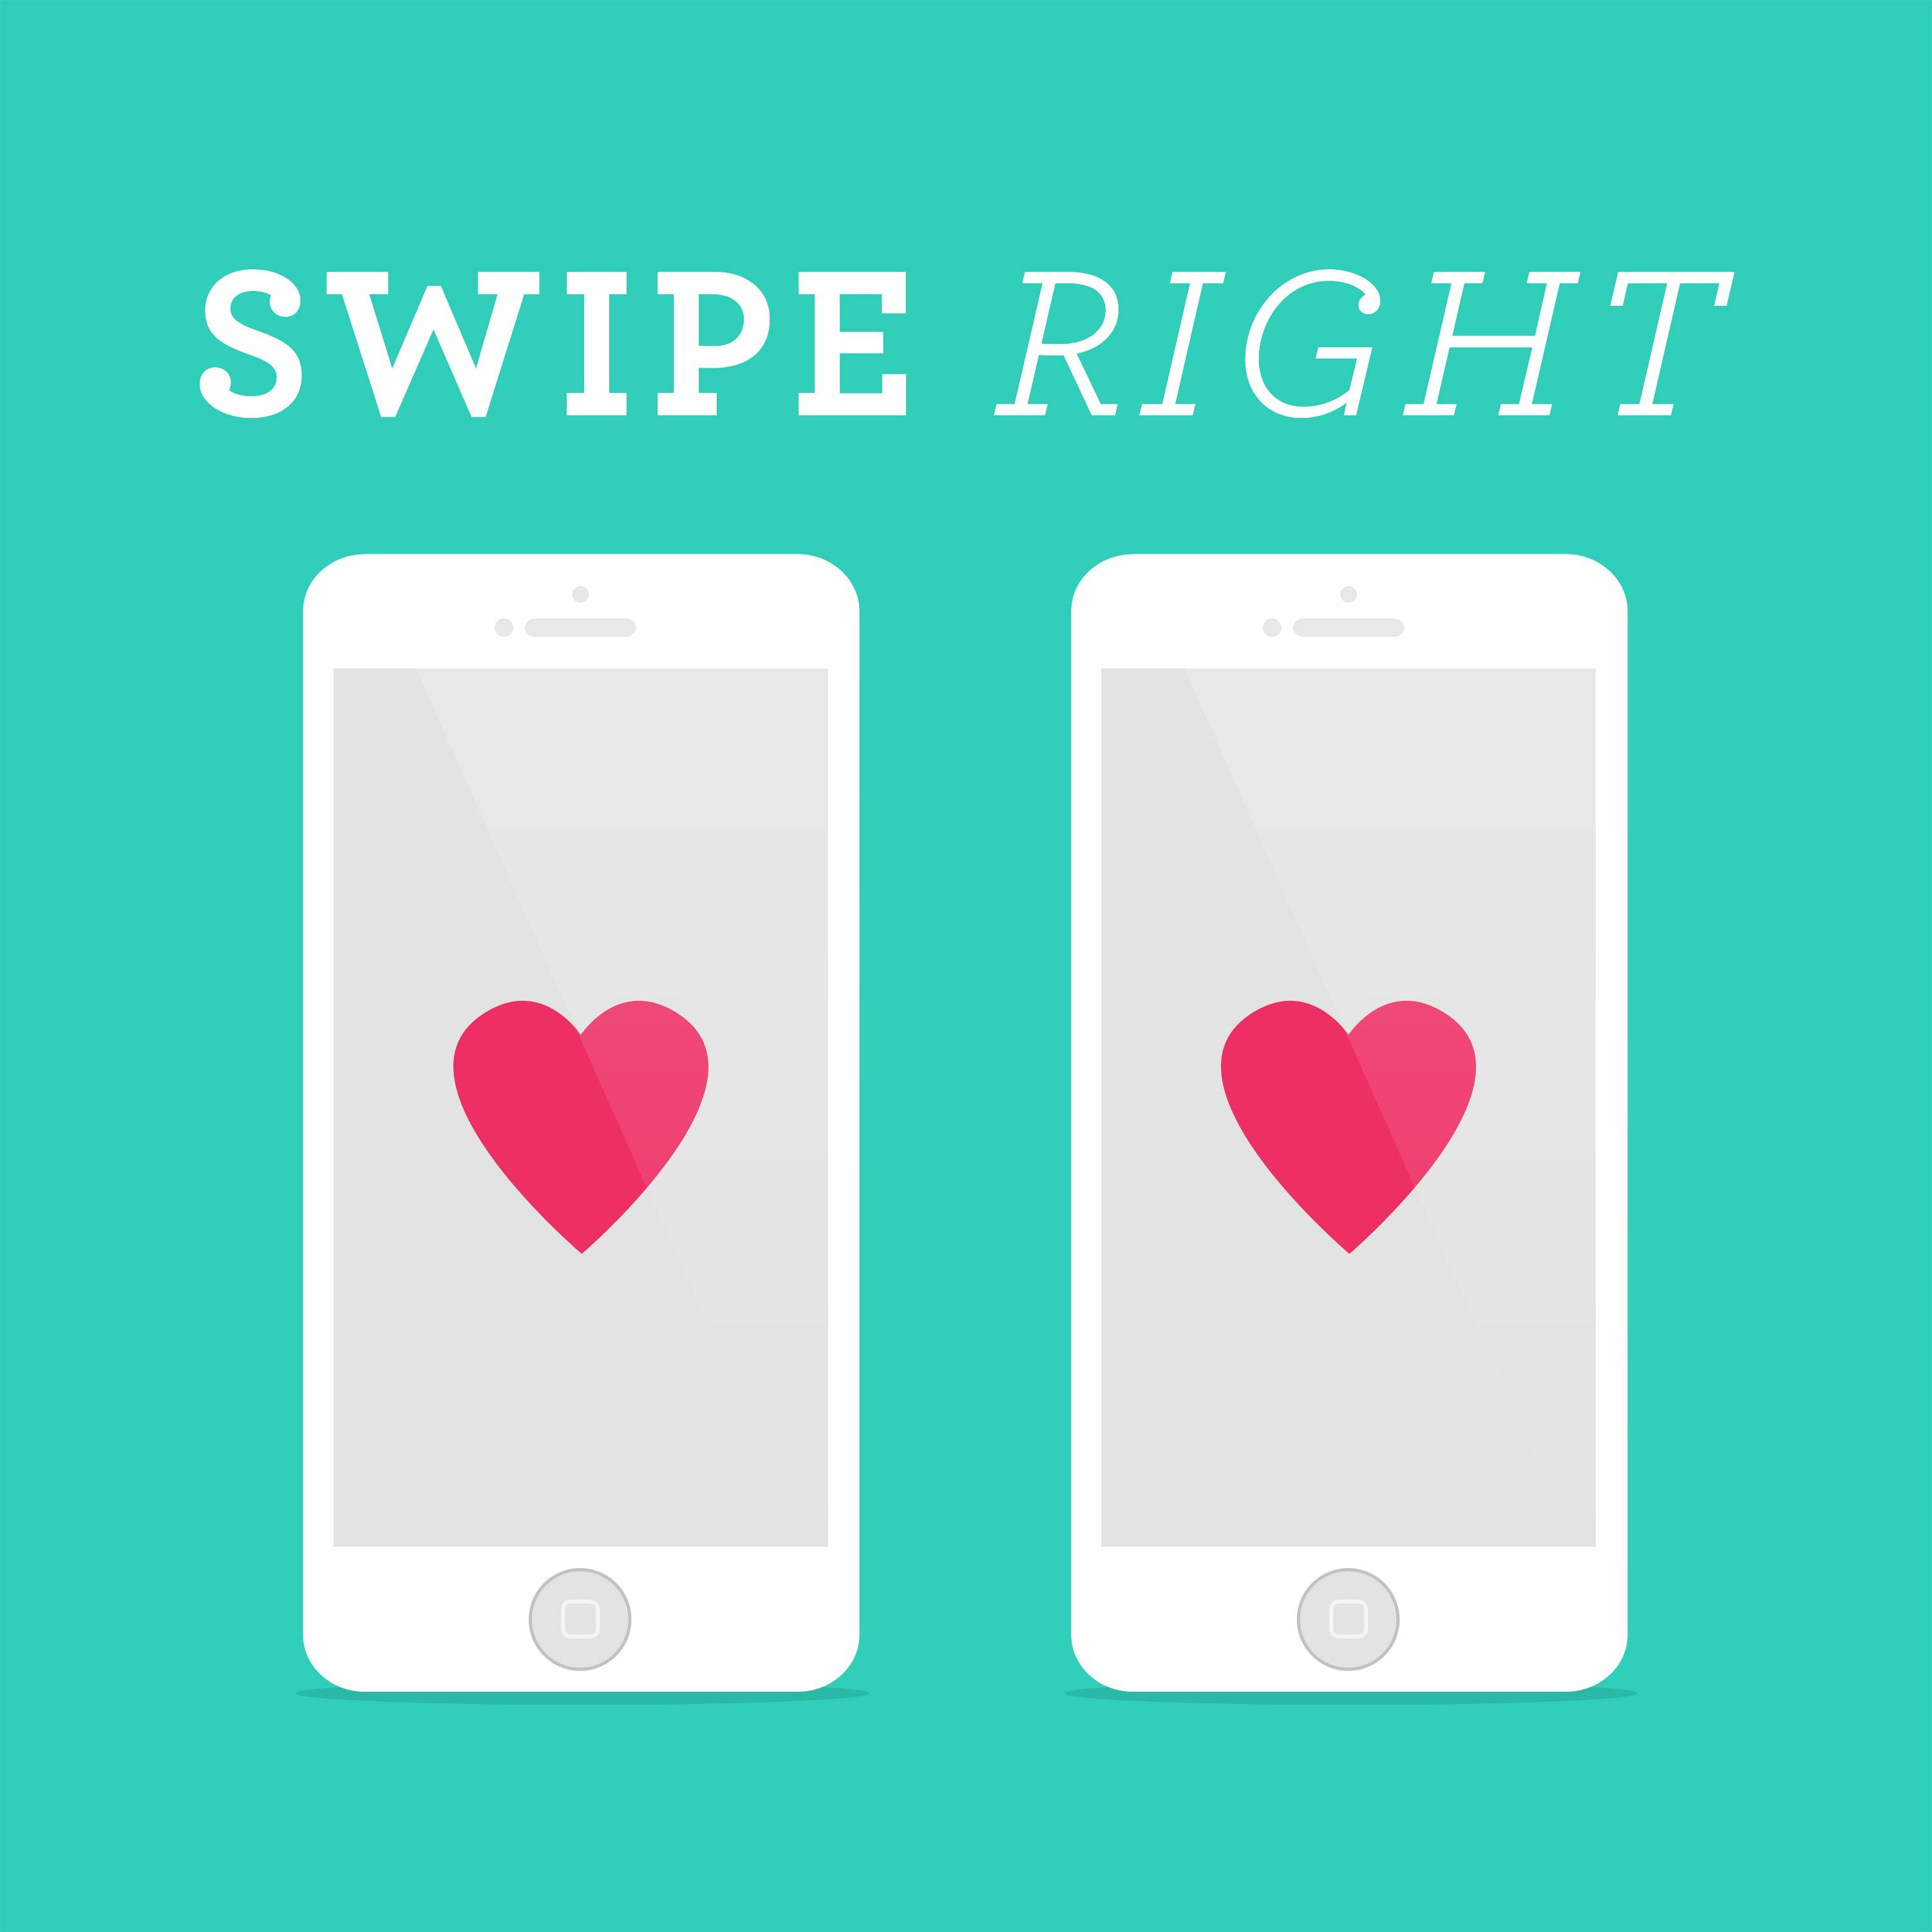 38: Swipe right? Men’s Take on Online Dating and Body Image